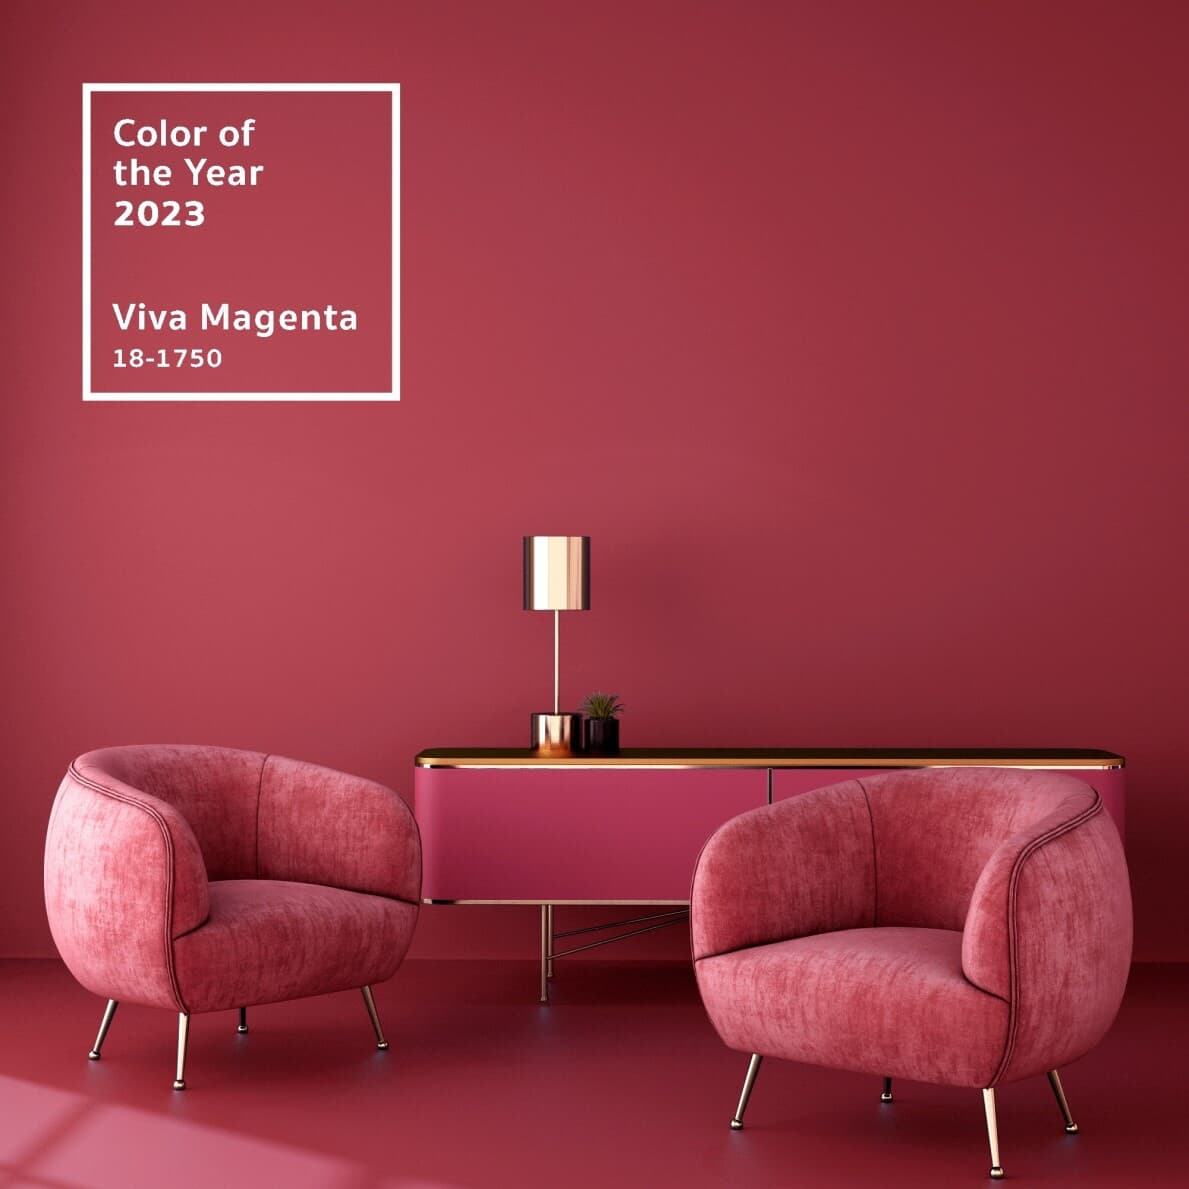 Viva Magenta - Pantone's 2023 Color of the Year in Nature - The